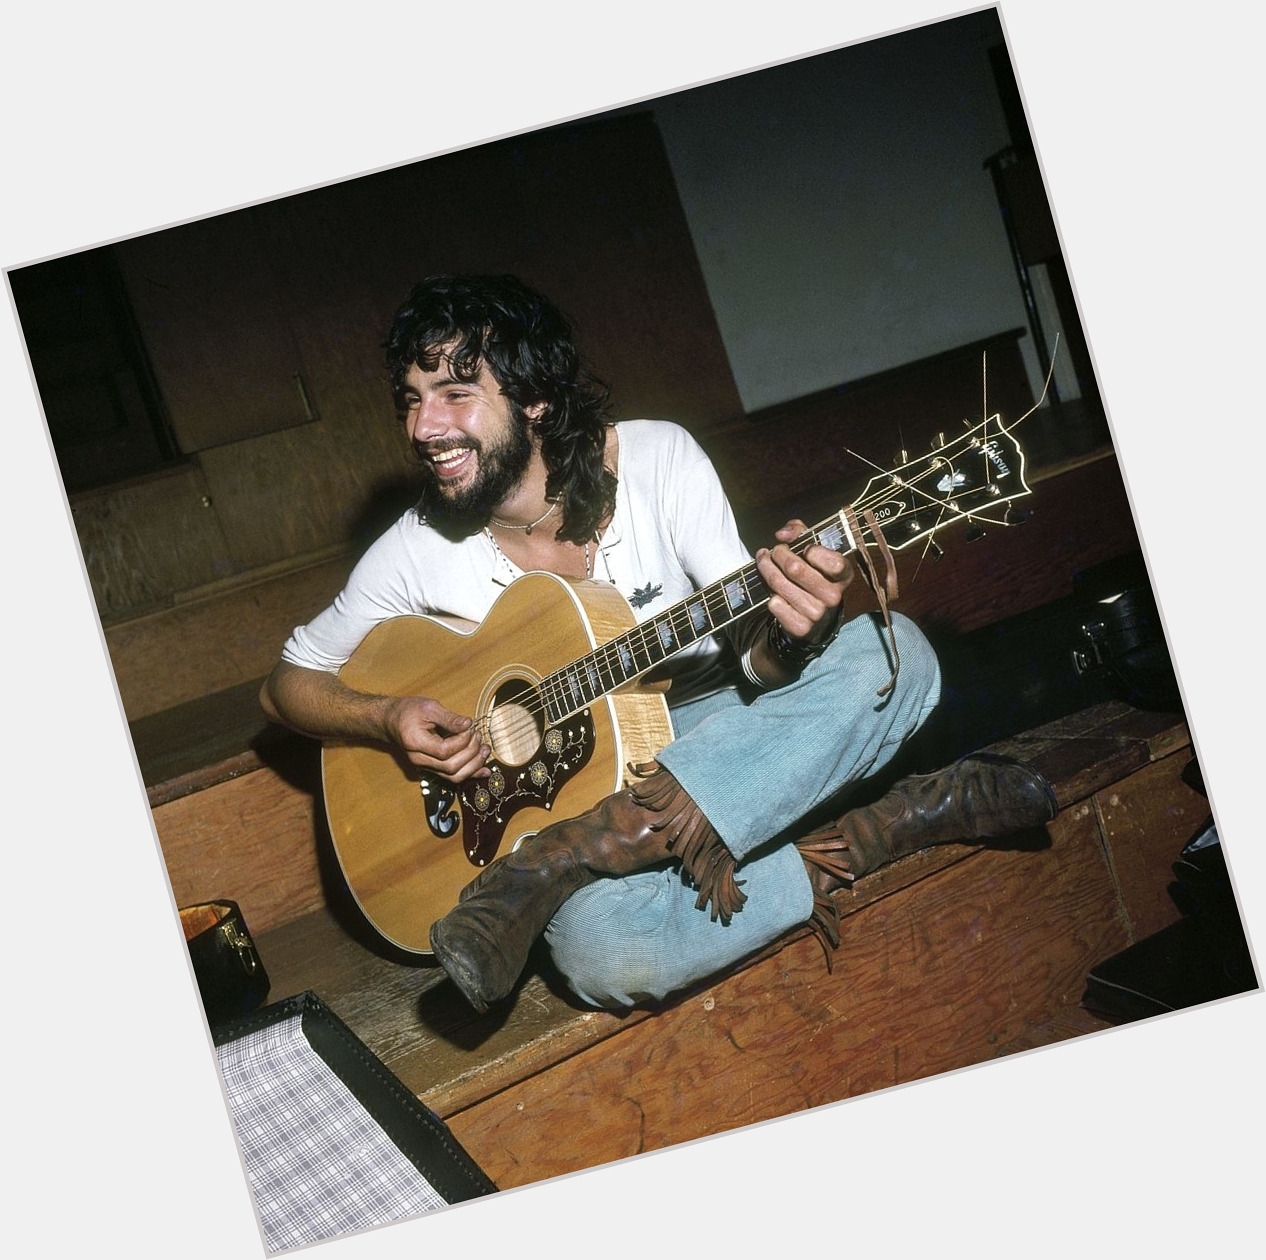 Happy Birthday to Cat Stevens who turns 73 years young today 